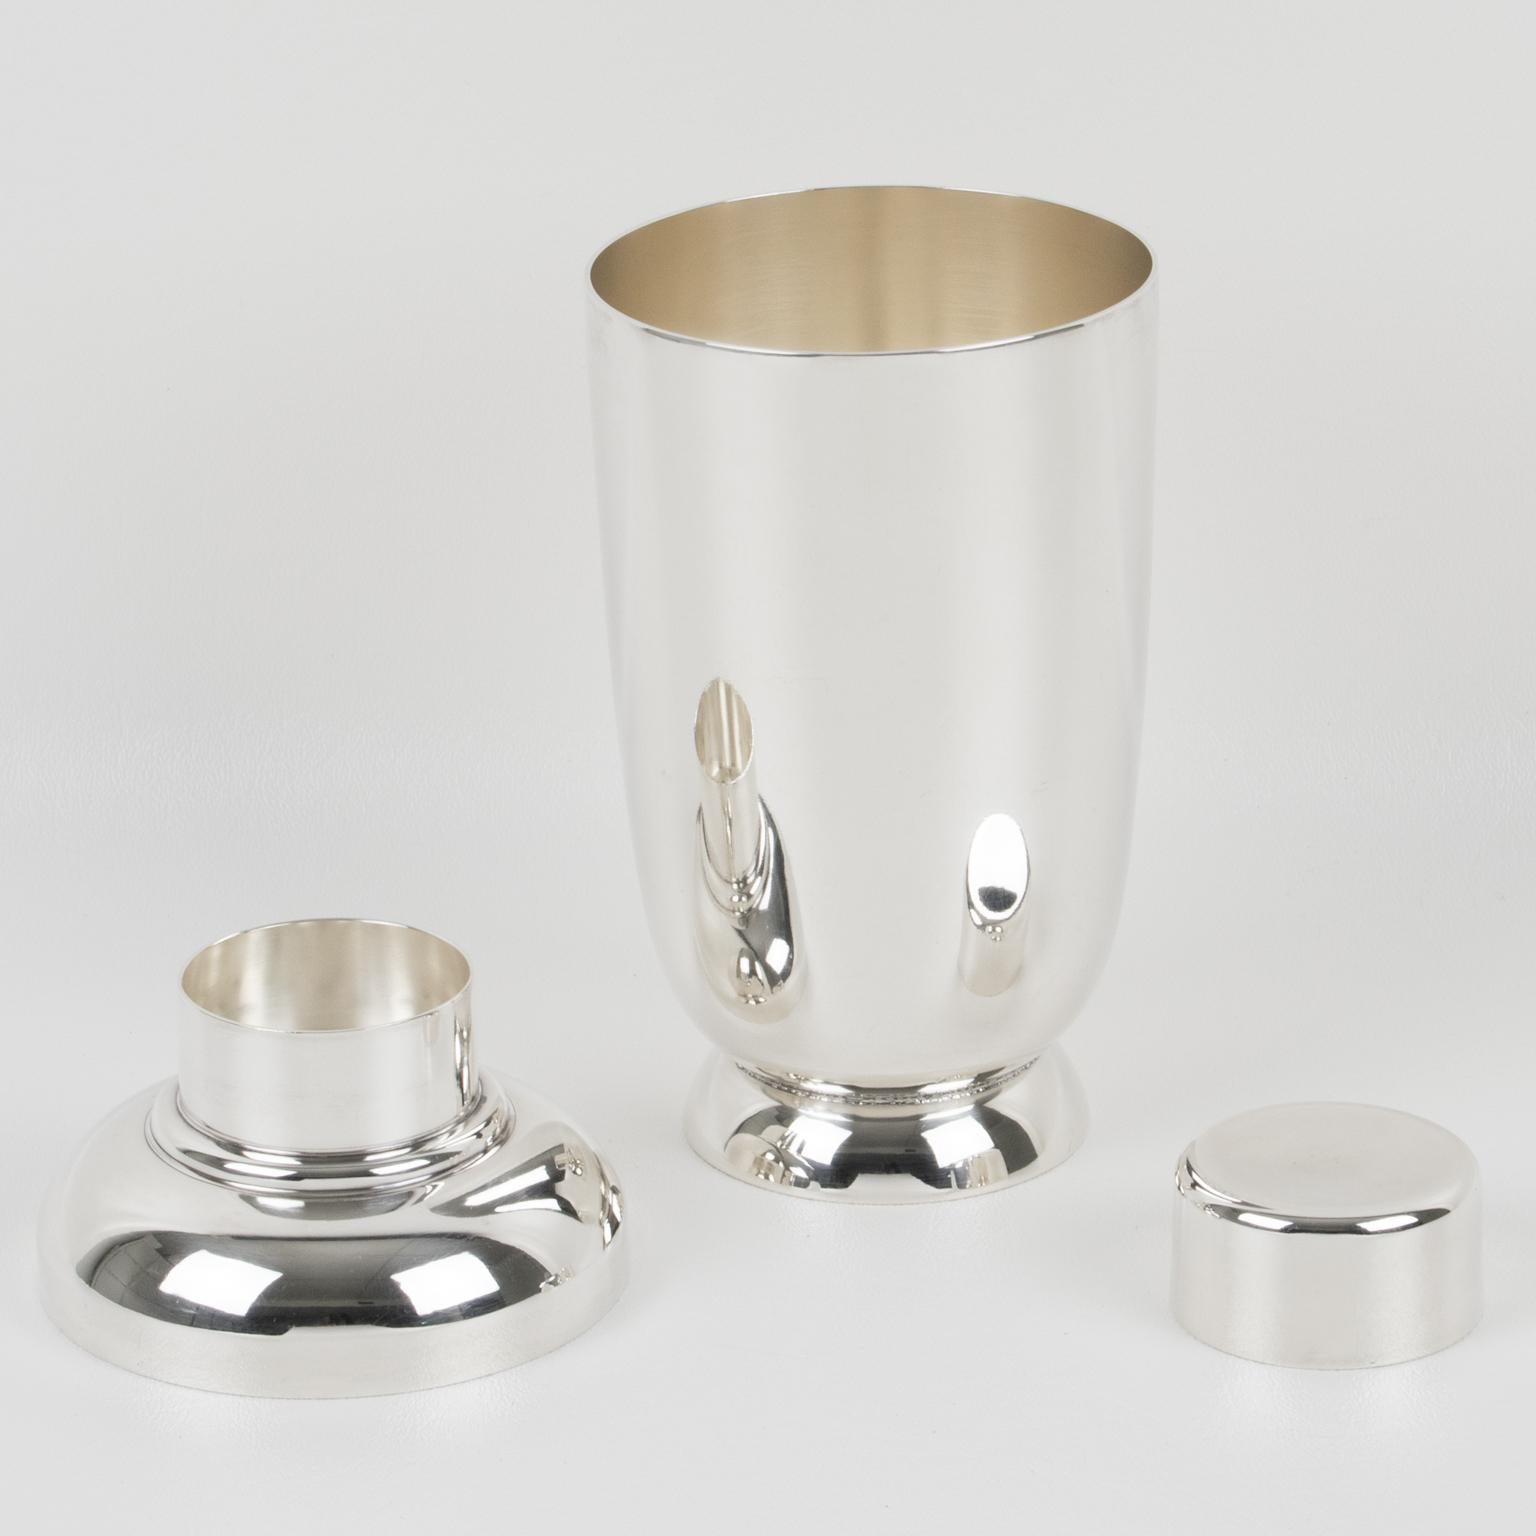 Elegant French Art Deco silver plate cylindrical cocktail or Martini shaker by silversmith Gallia, France. This is a large and tall three-sectioned designed cocktail shaker with a removable cap and strainer. Lovely sleek design with very rounded